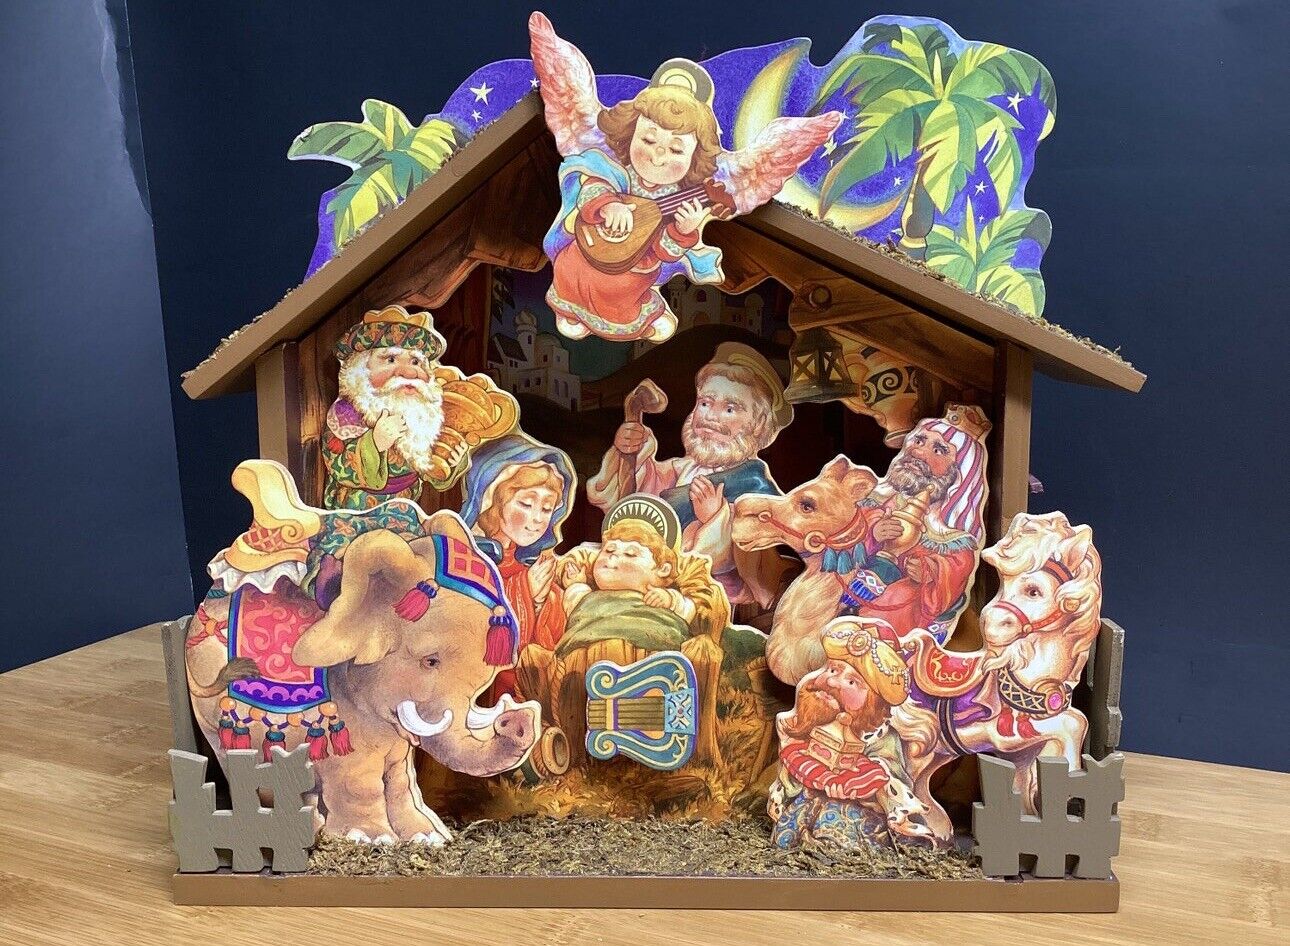 Rare Vtg Wind Up, Moving Musical, Lighted Nativity Plays Silent Night